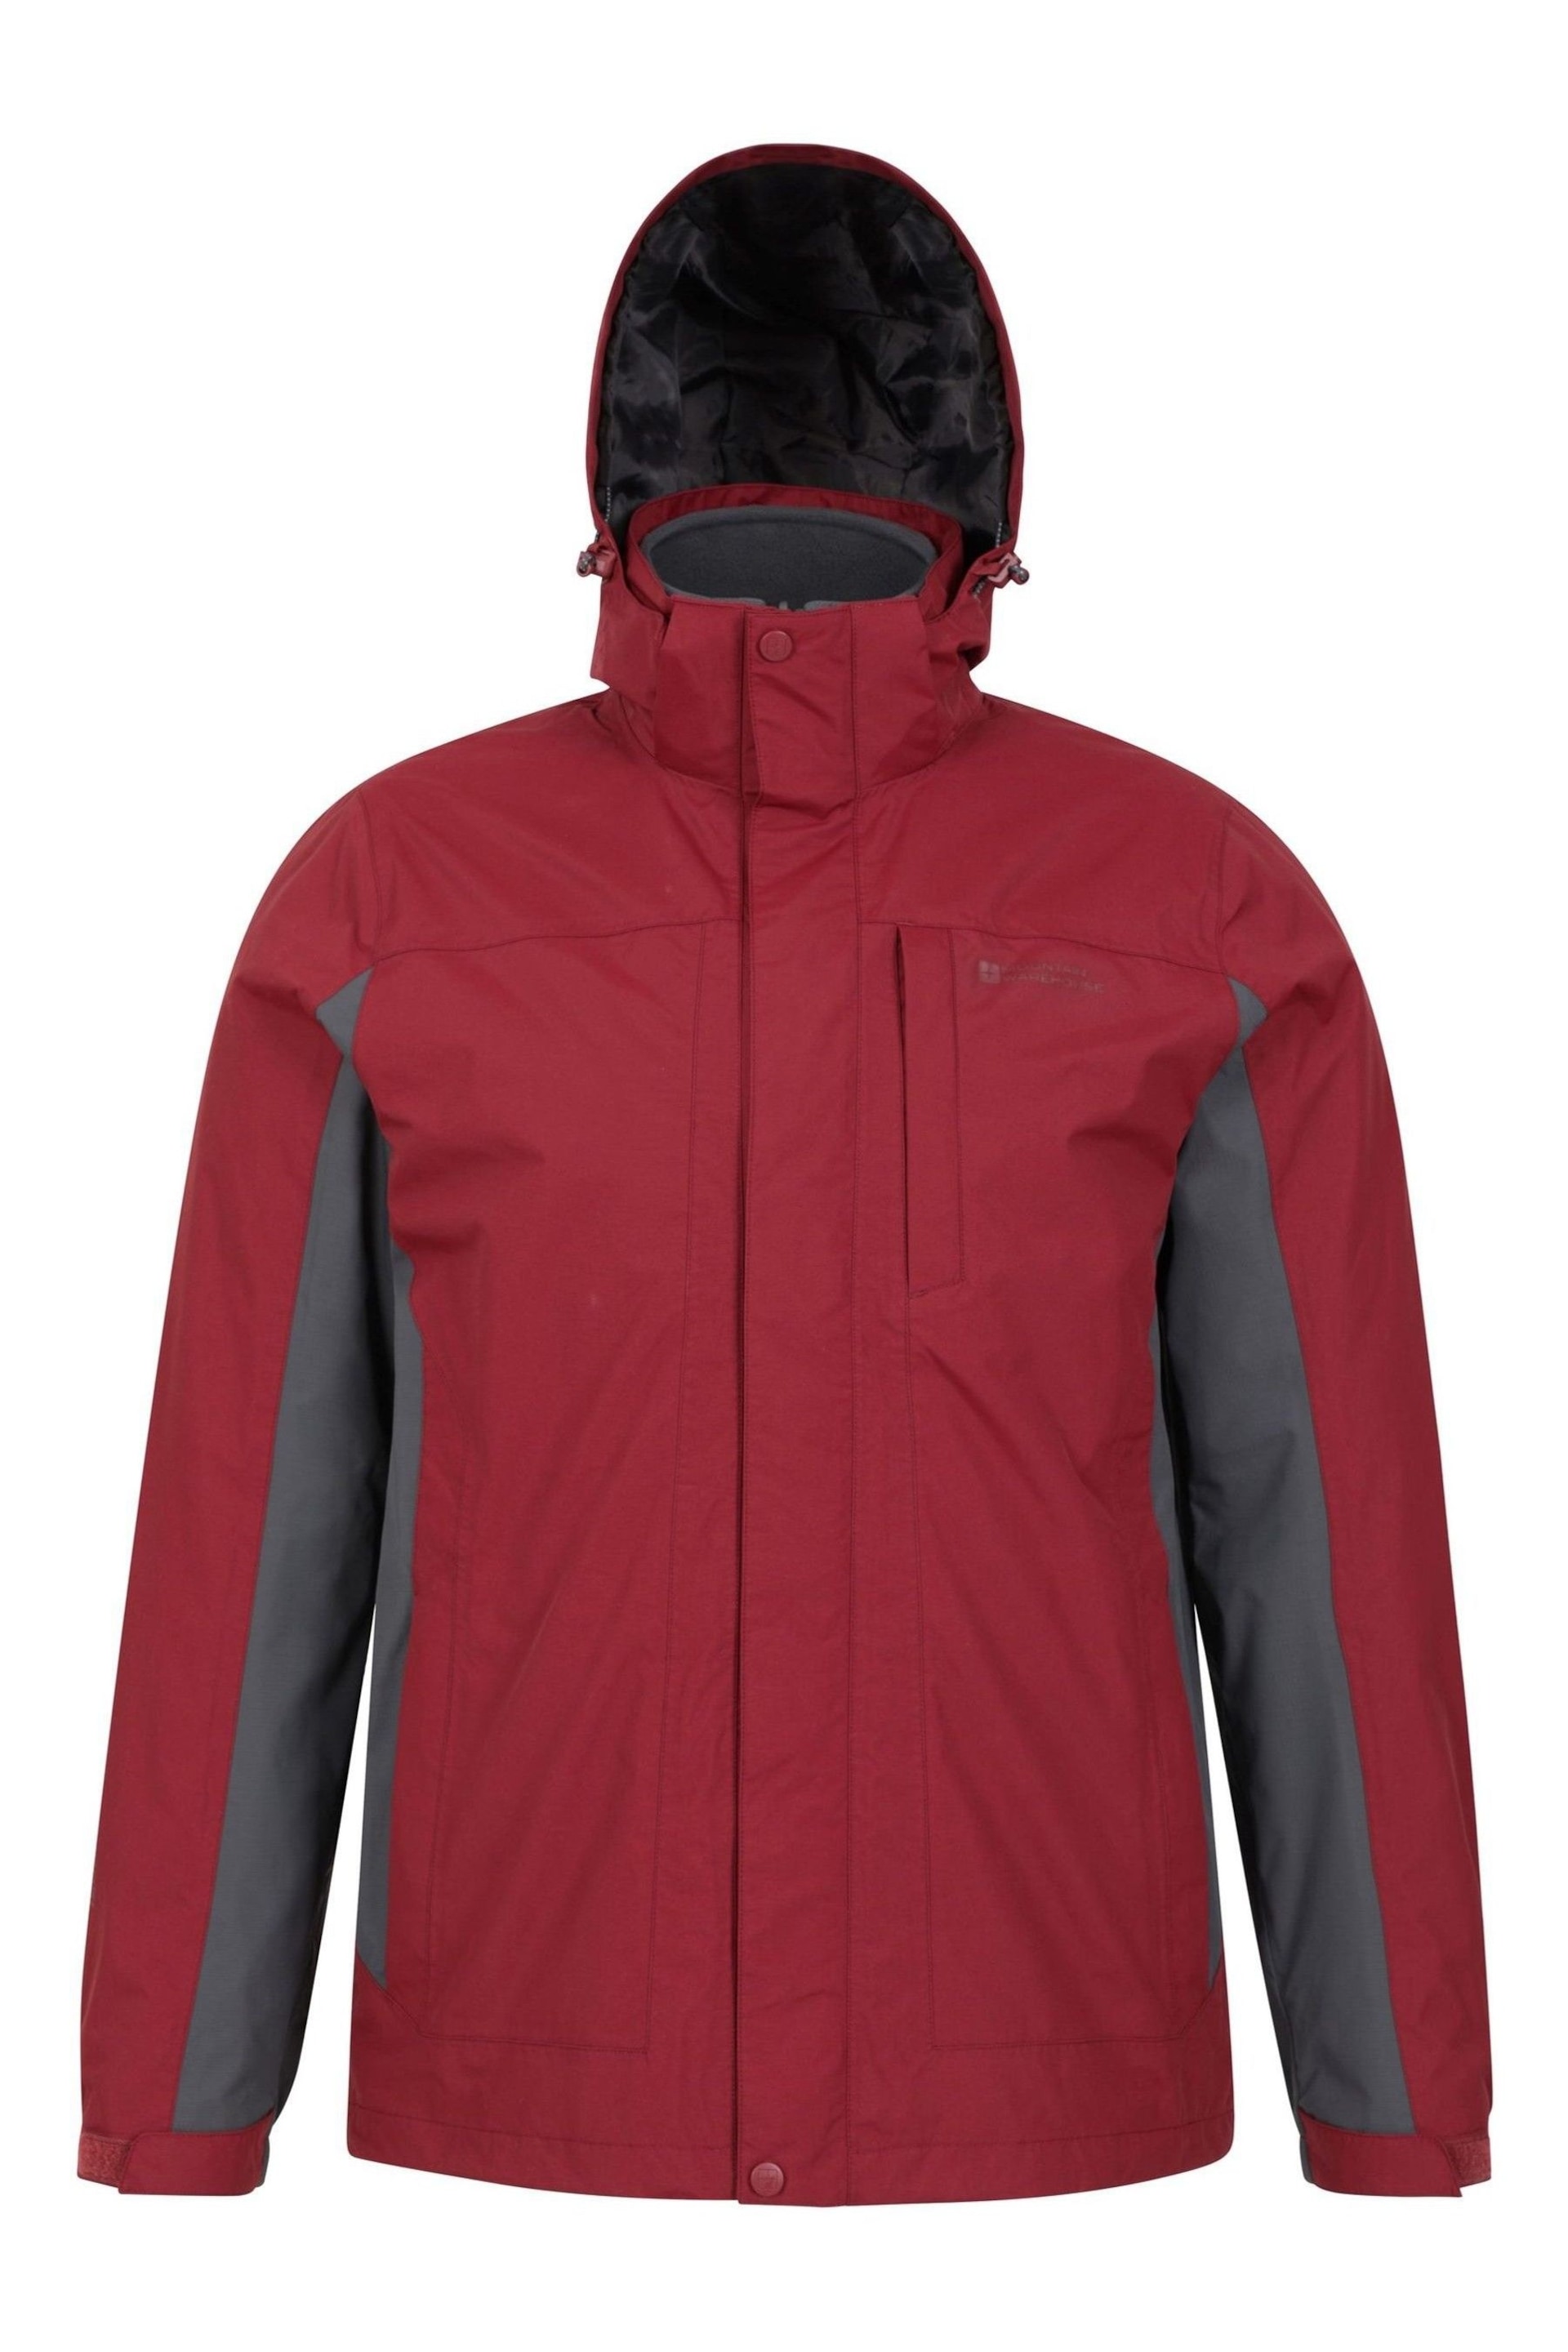 Mountain Warehouse Red Mens Thunderstorm Waterproof 3-In-1 Jacket - Image 3 of 5